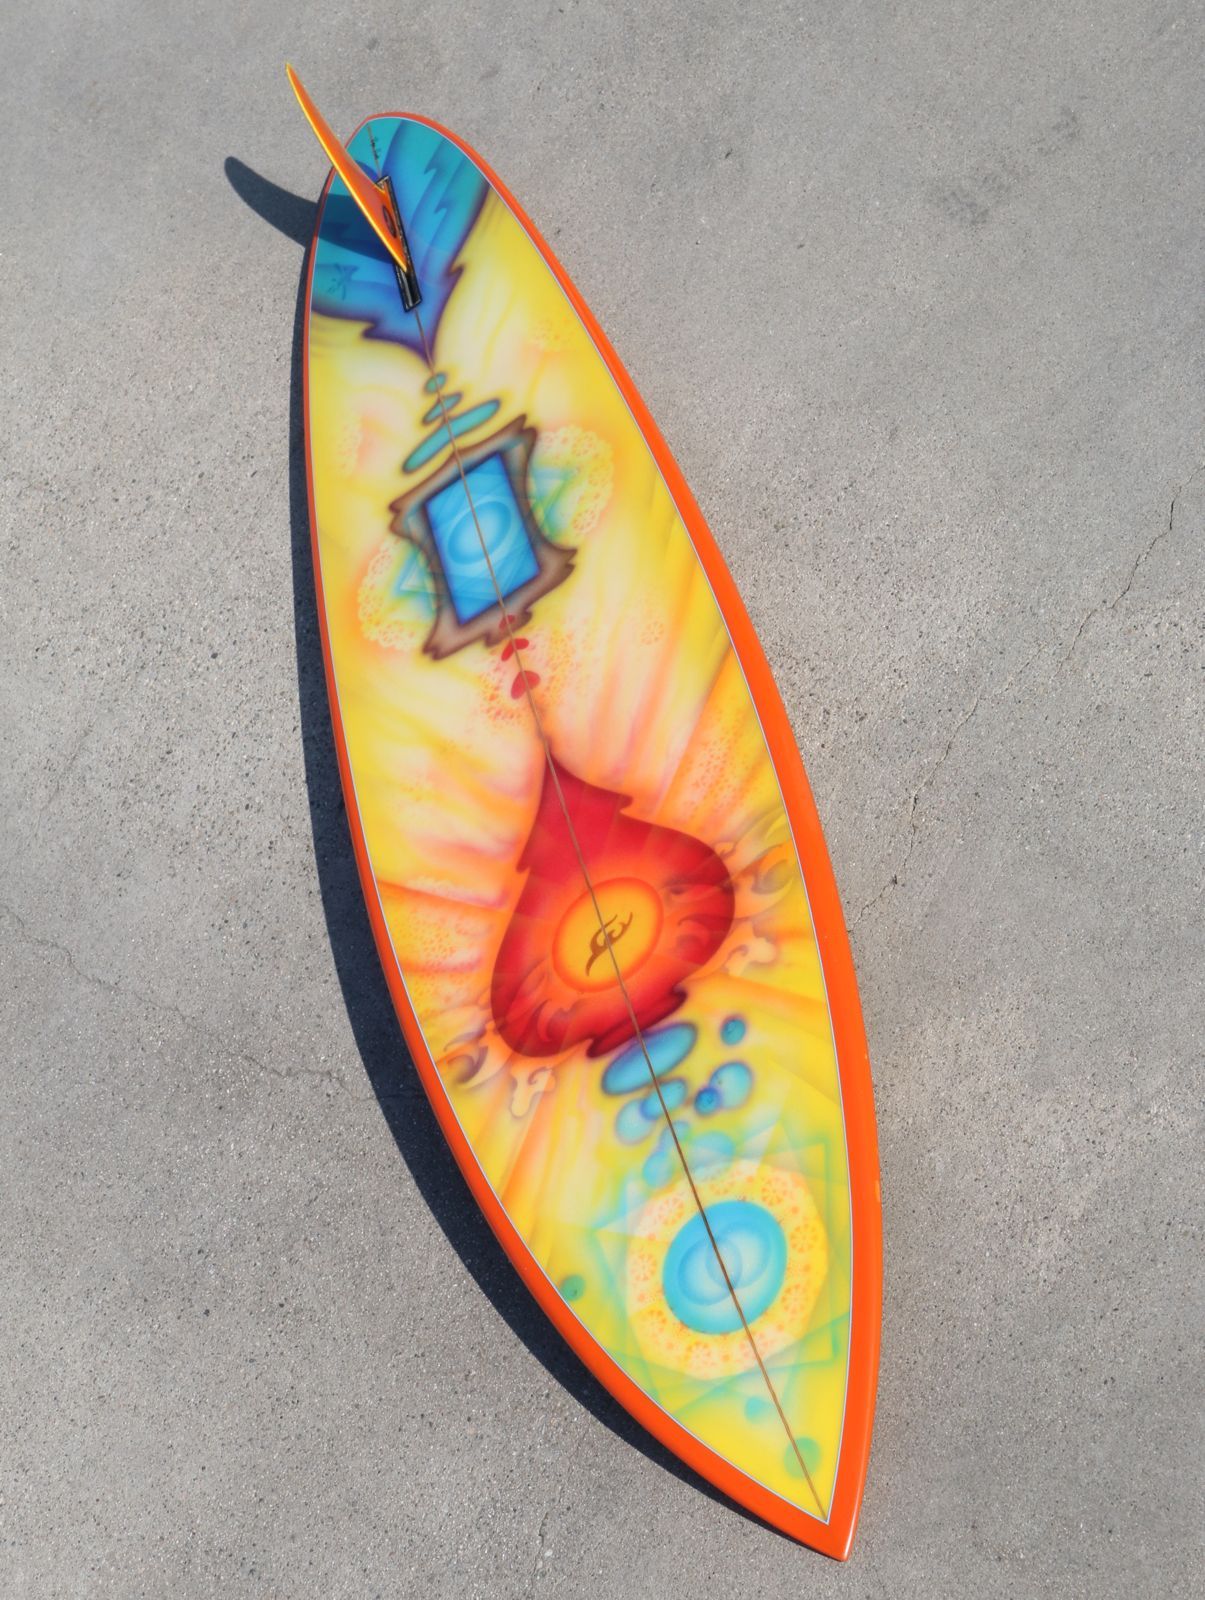 This board  is beyond eye-catching  it is a genuine collectible work of art by  Drew Brophy and Roger Hinds.  It is one of 6 boards created for the Sacred Surf series. 

This board started out life in the early 1970's and saw enough use to make it